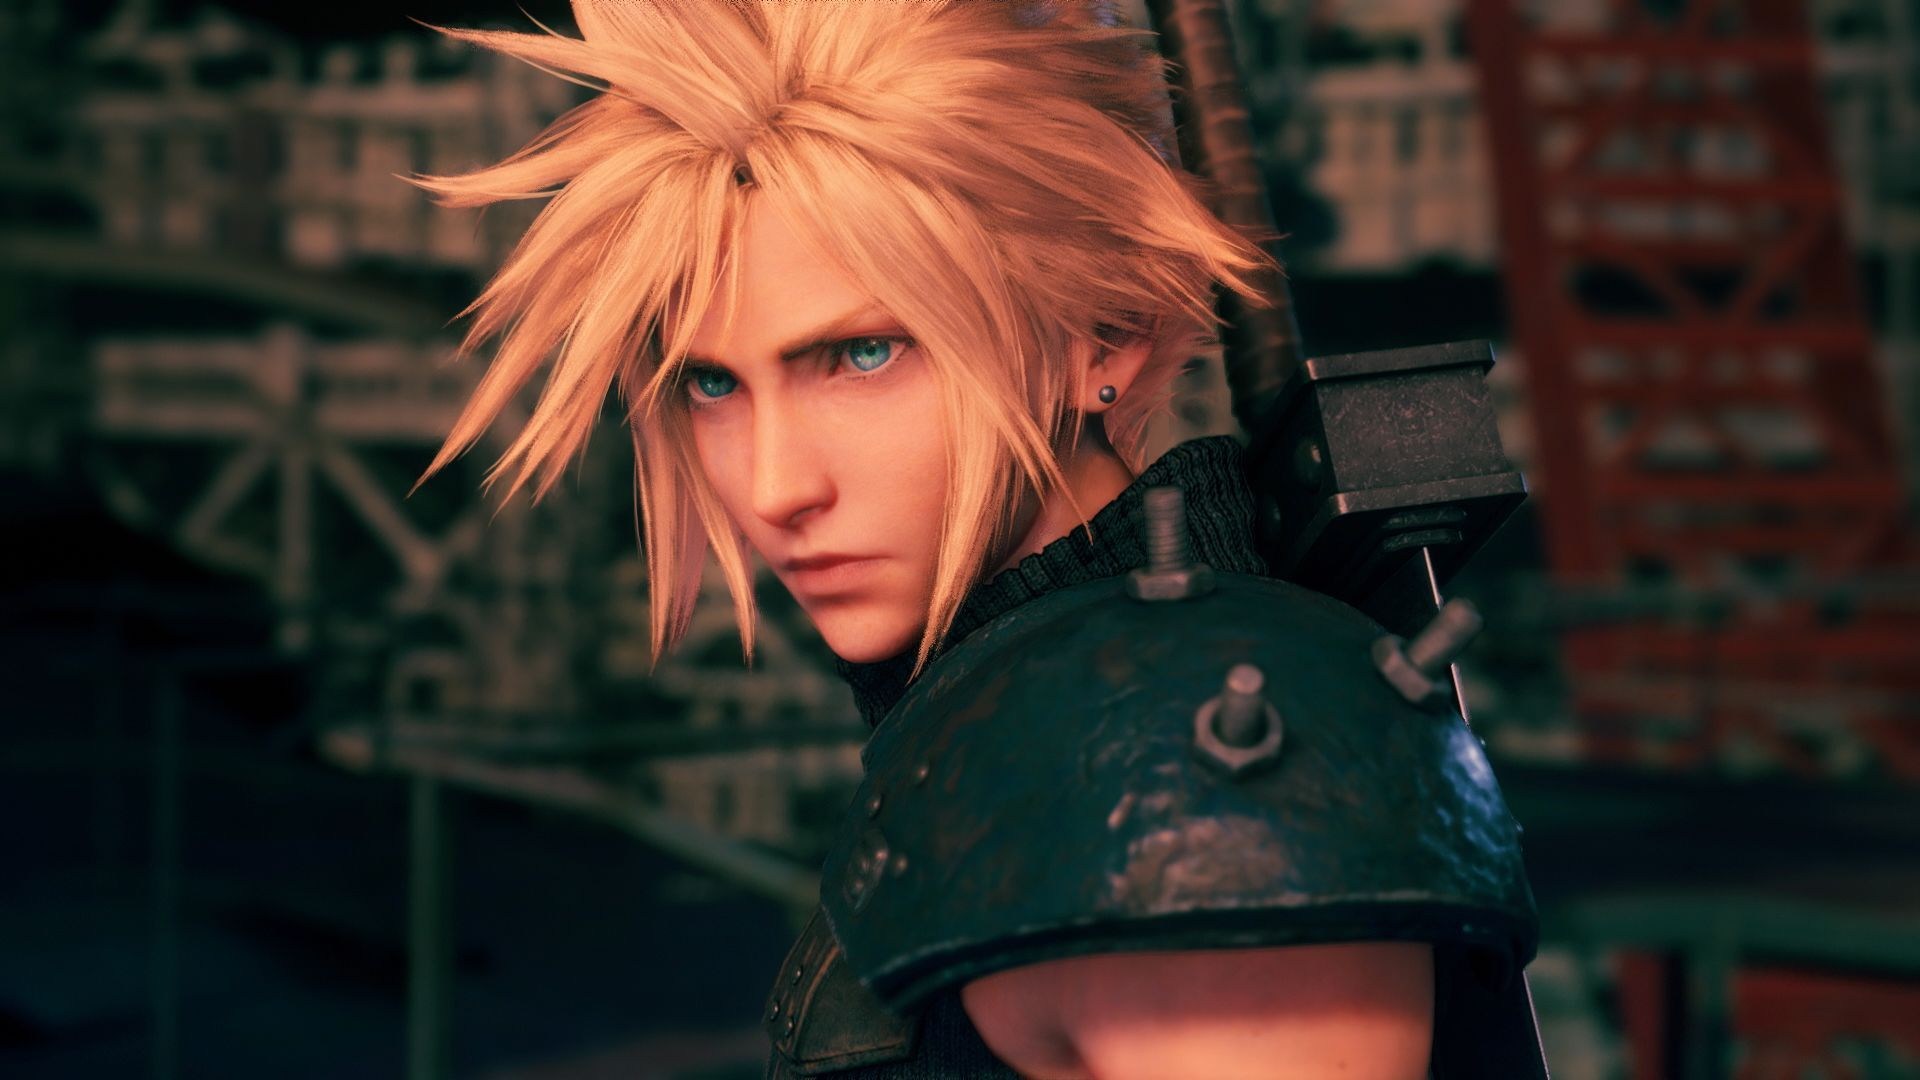 Final Fantasy 7 Remake gets first patch, still doesn’t fix texture issues